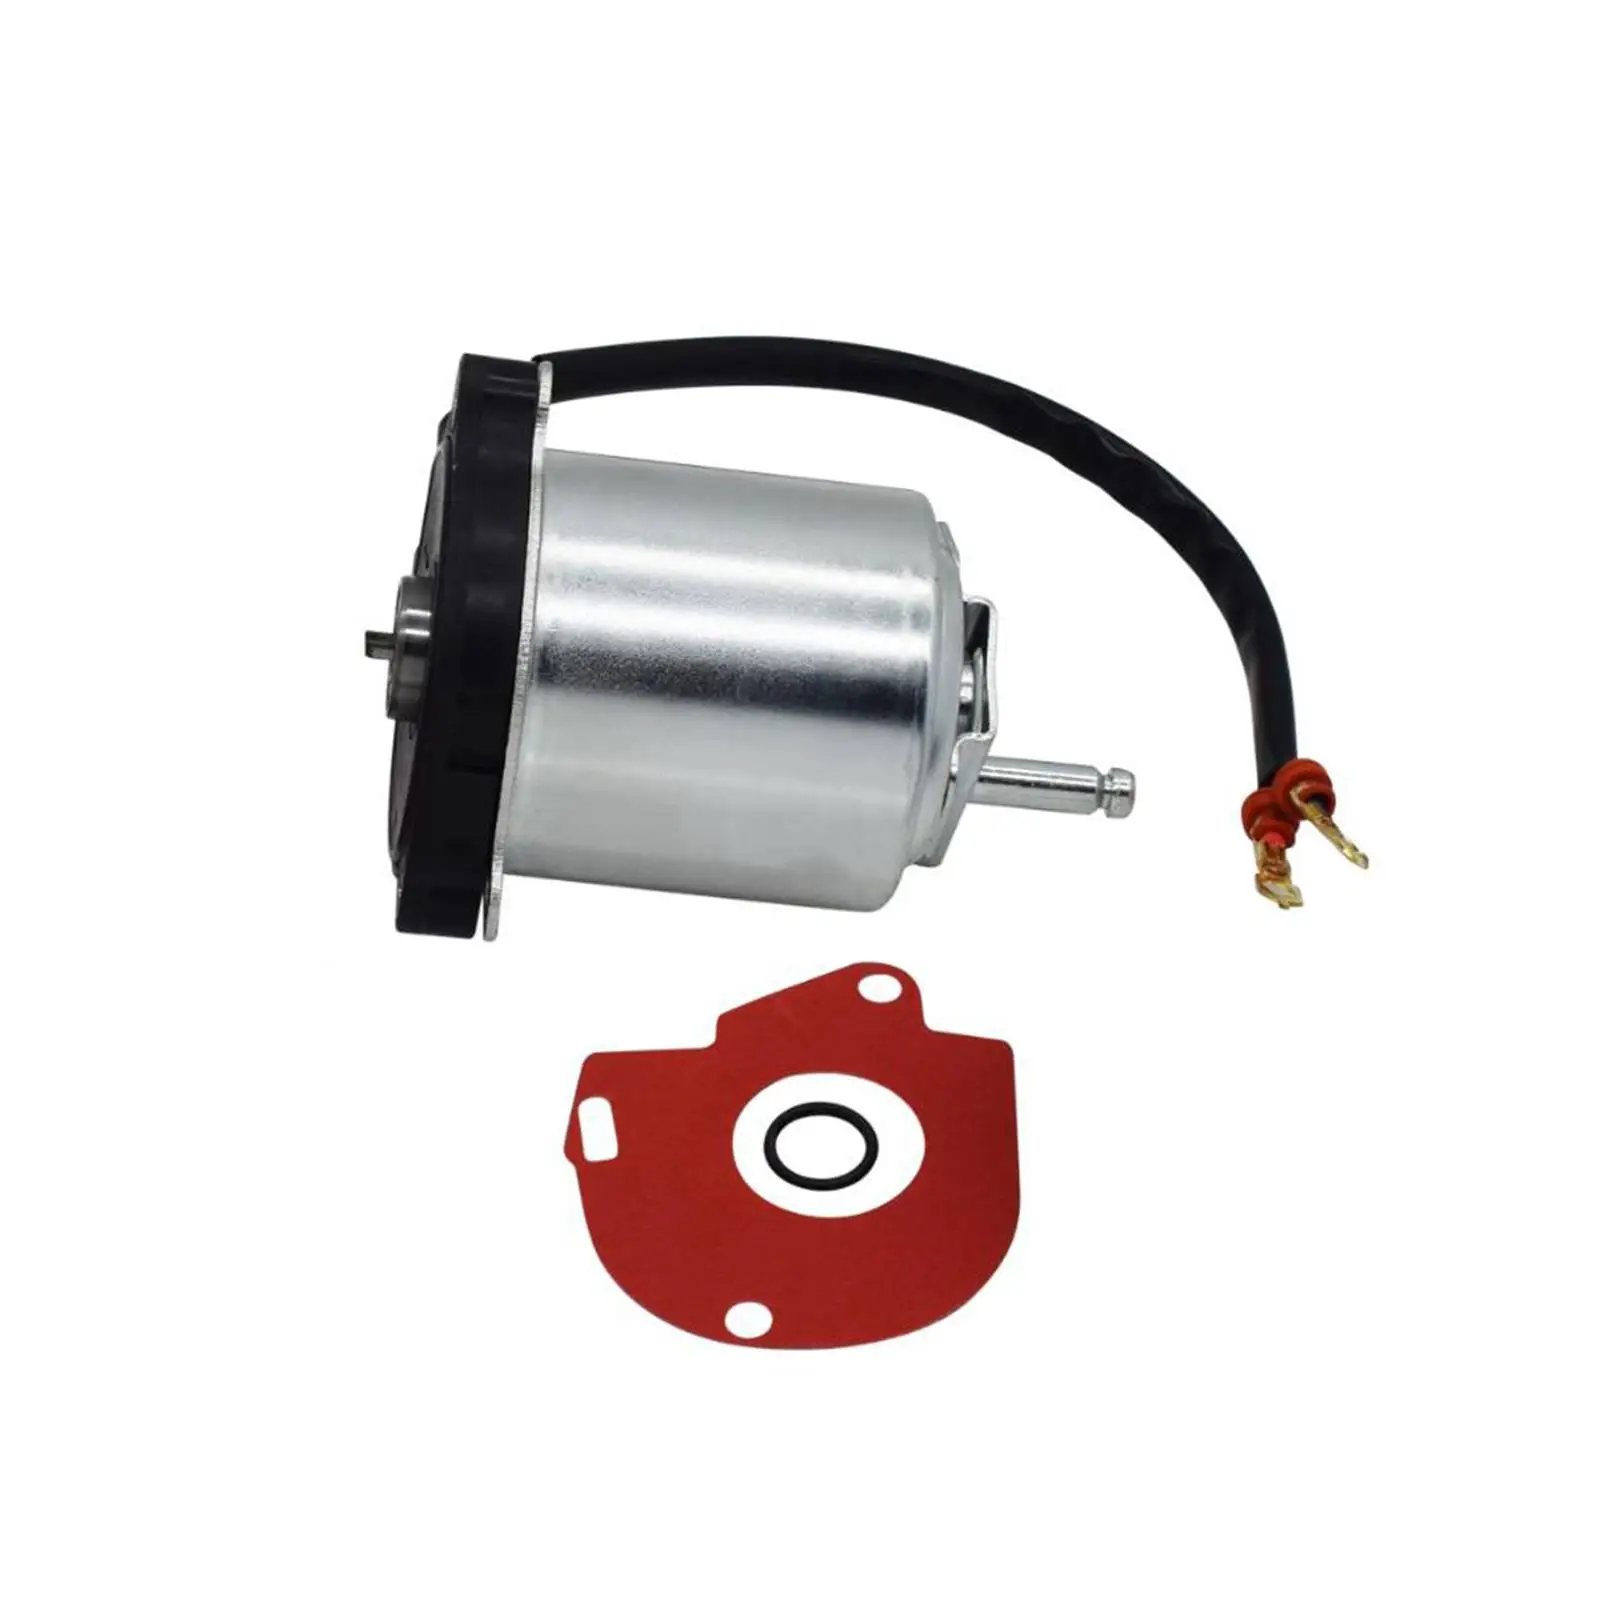 ABS Brake Booster Pump Motor Assembly 47960 60050 Accessories High Performance for Lexus for land cruiser LX570 LX450D Gx460